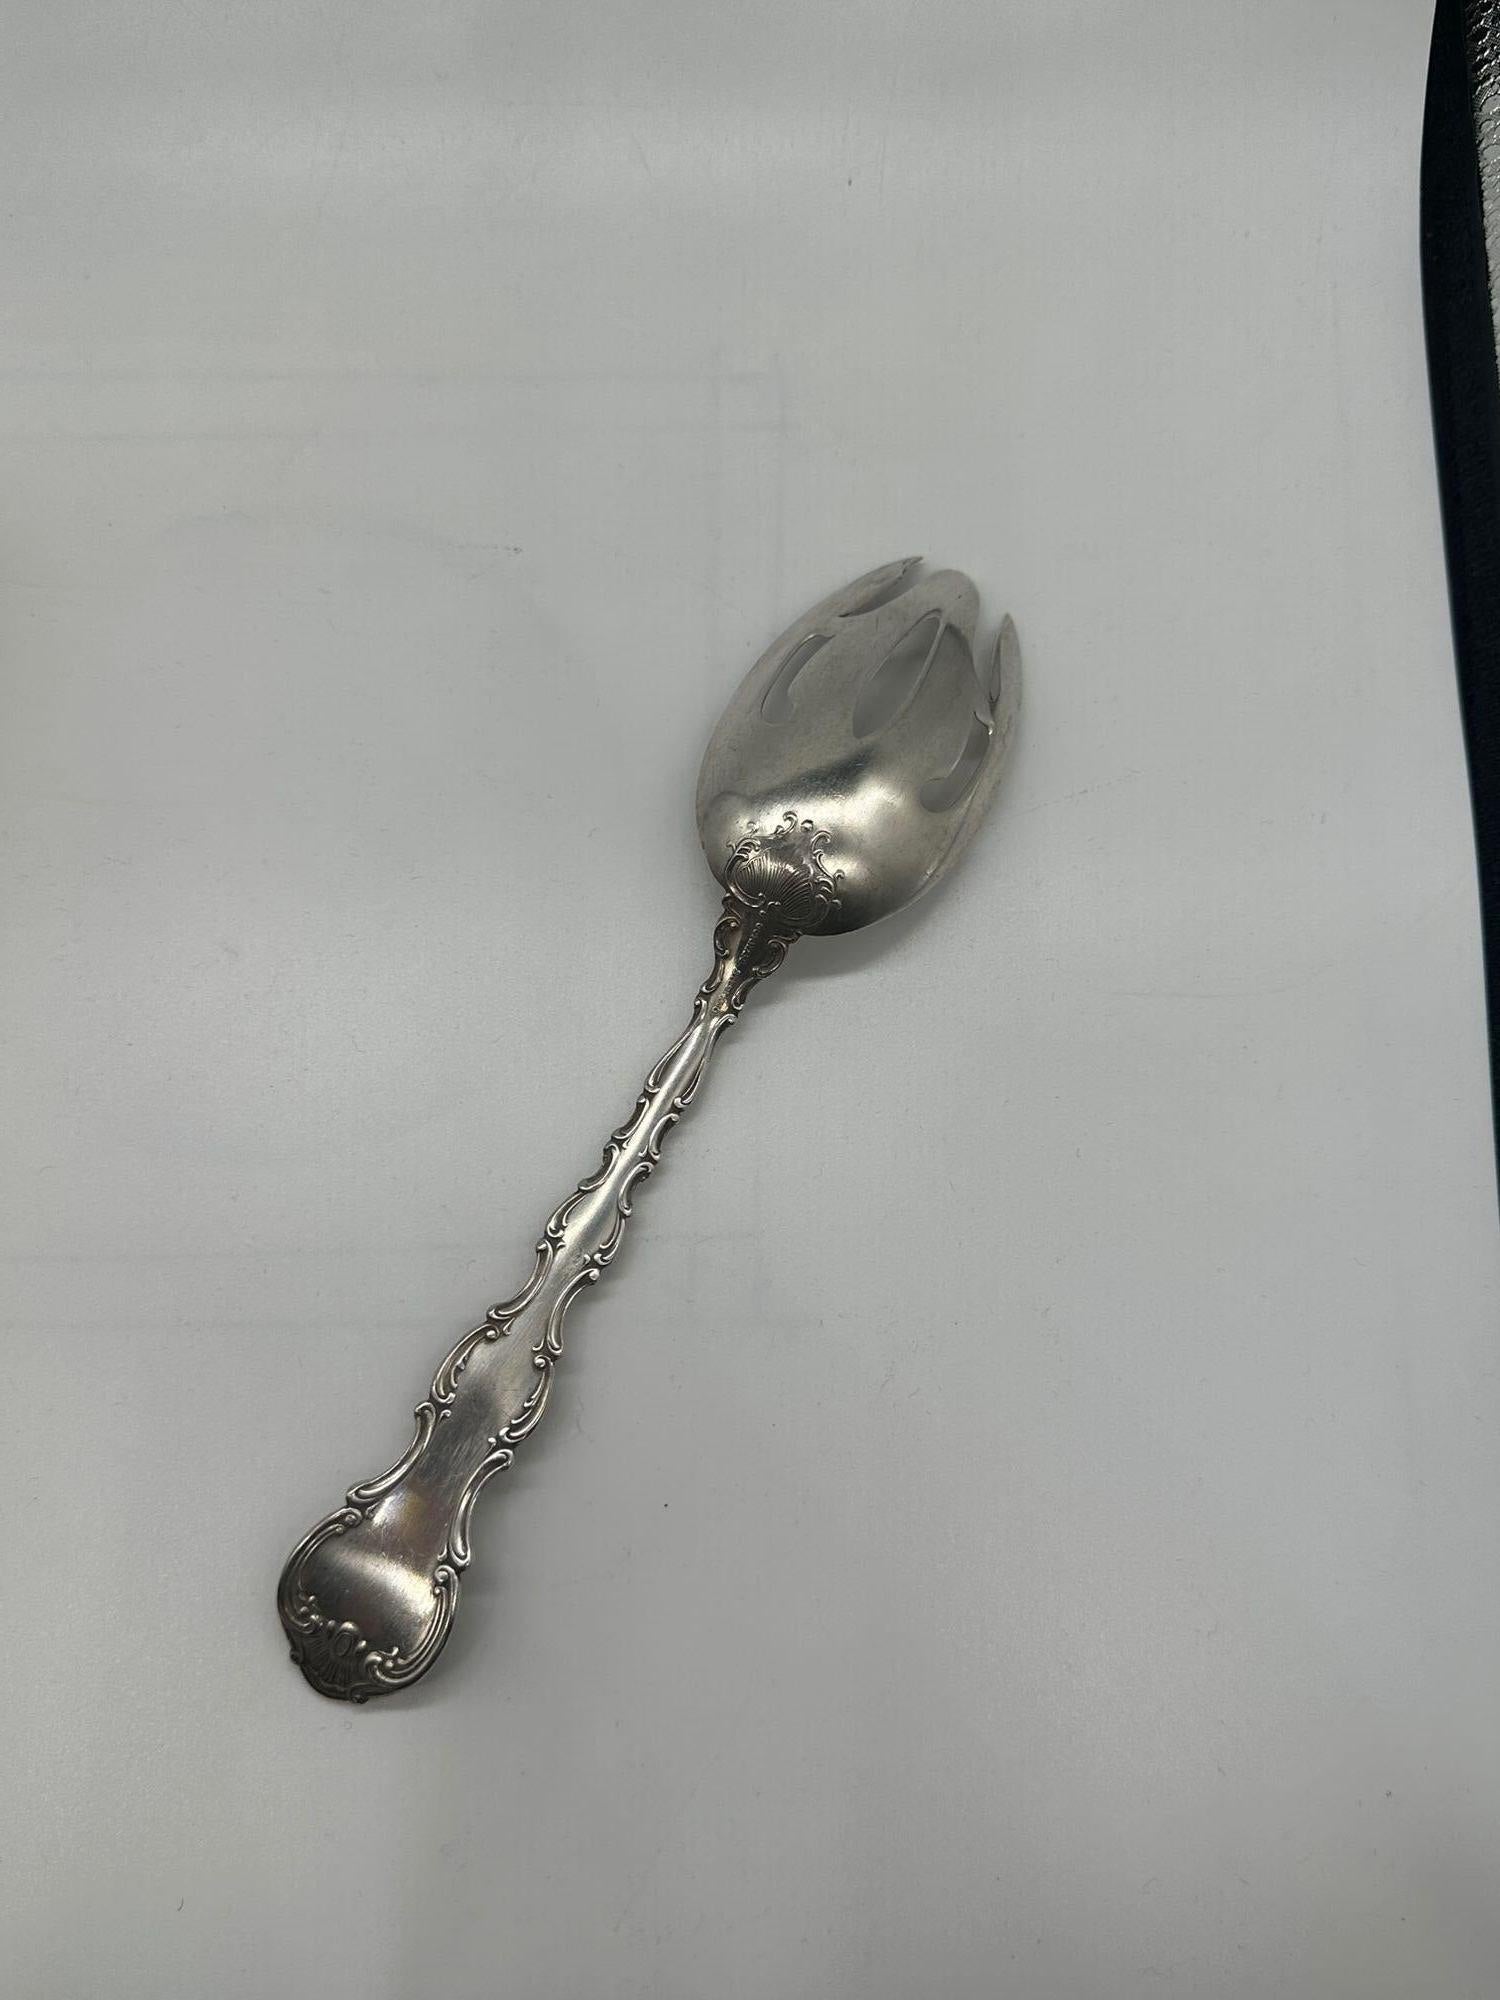 Strasbourg Gorham Sterling Silver Serving Spoon w/ Pierced Bowl & Tines In Good Condition For Sale In Van Nuys, CA